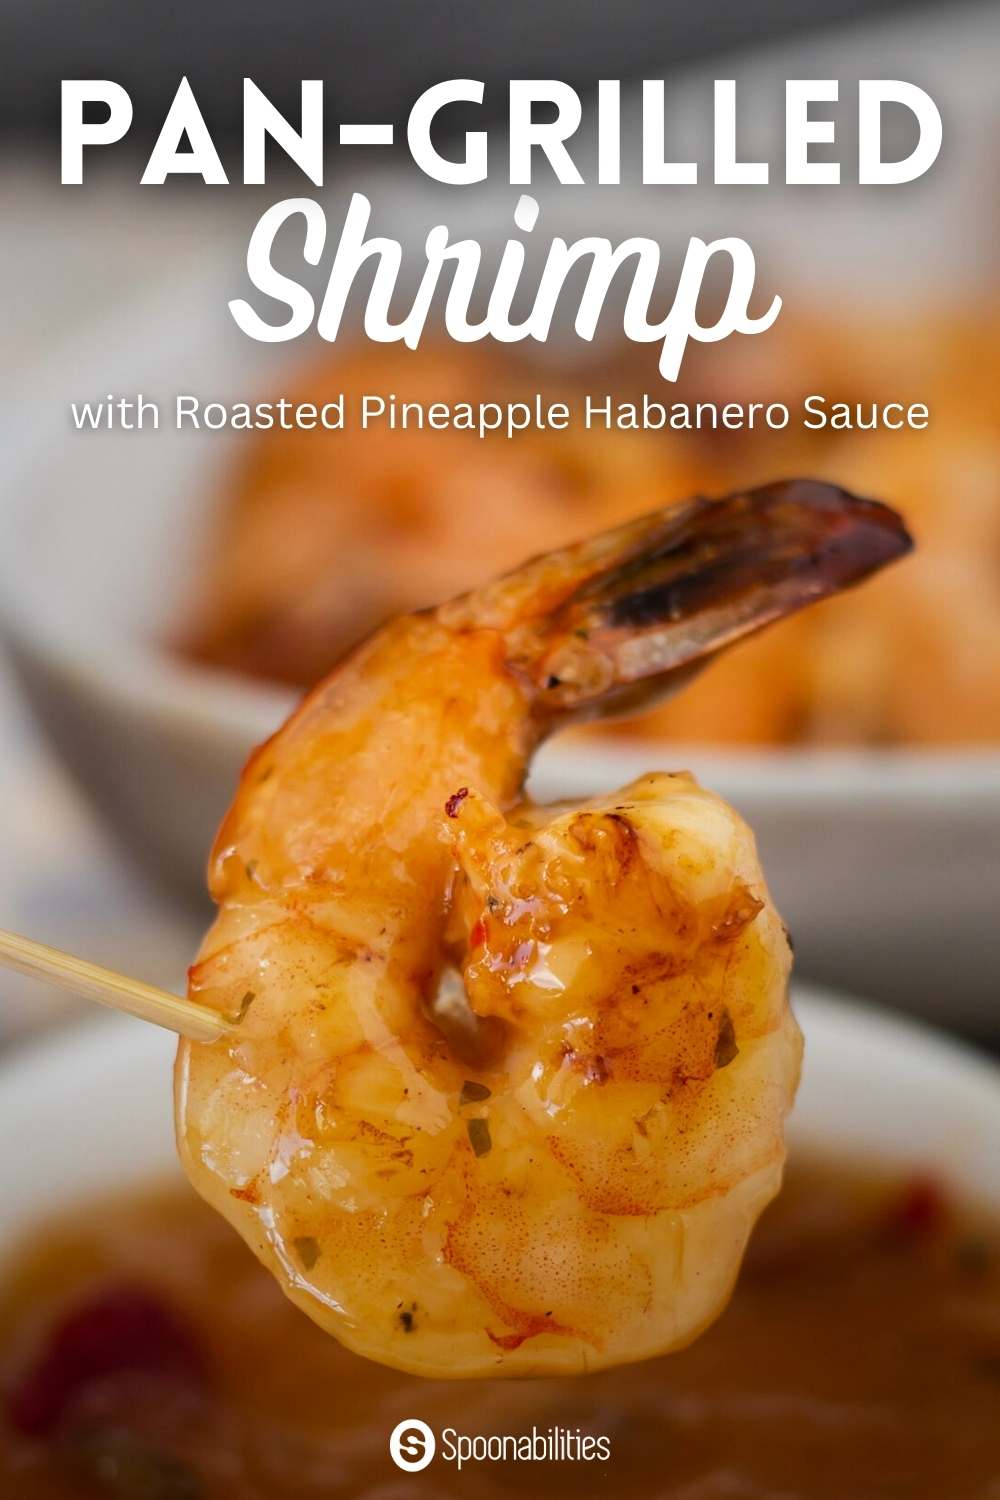 Pan Grilled Shrimp with Roasted Pineapple Habanero Sauce in the background